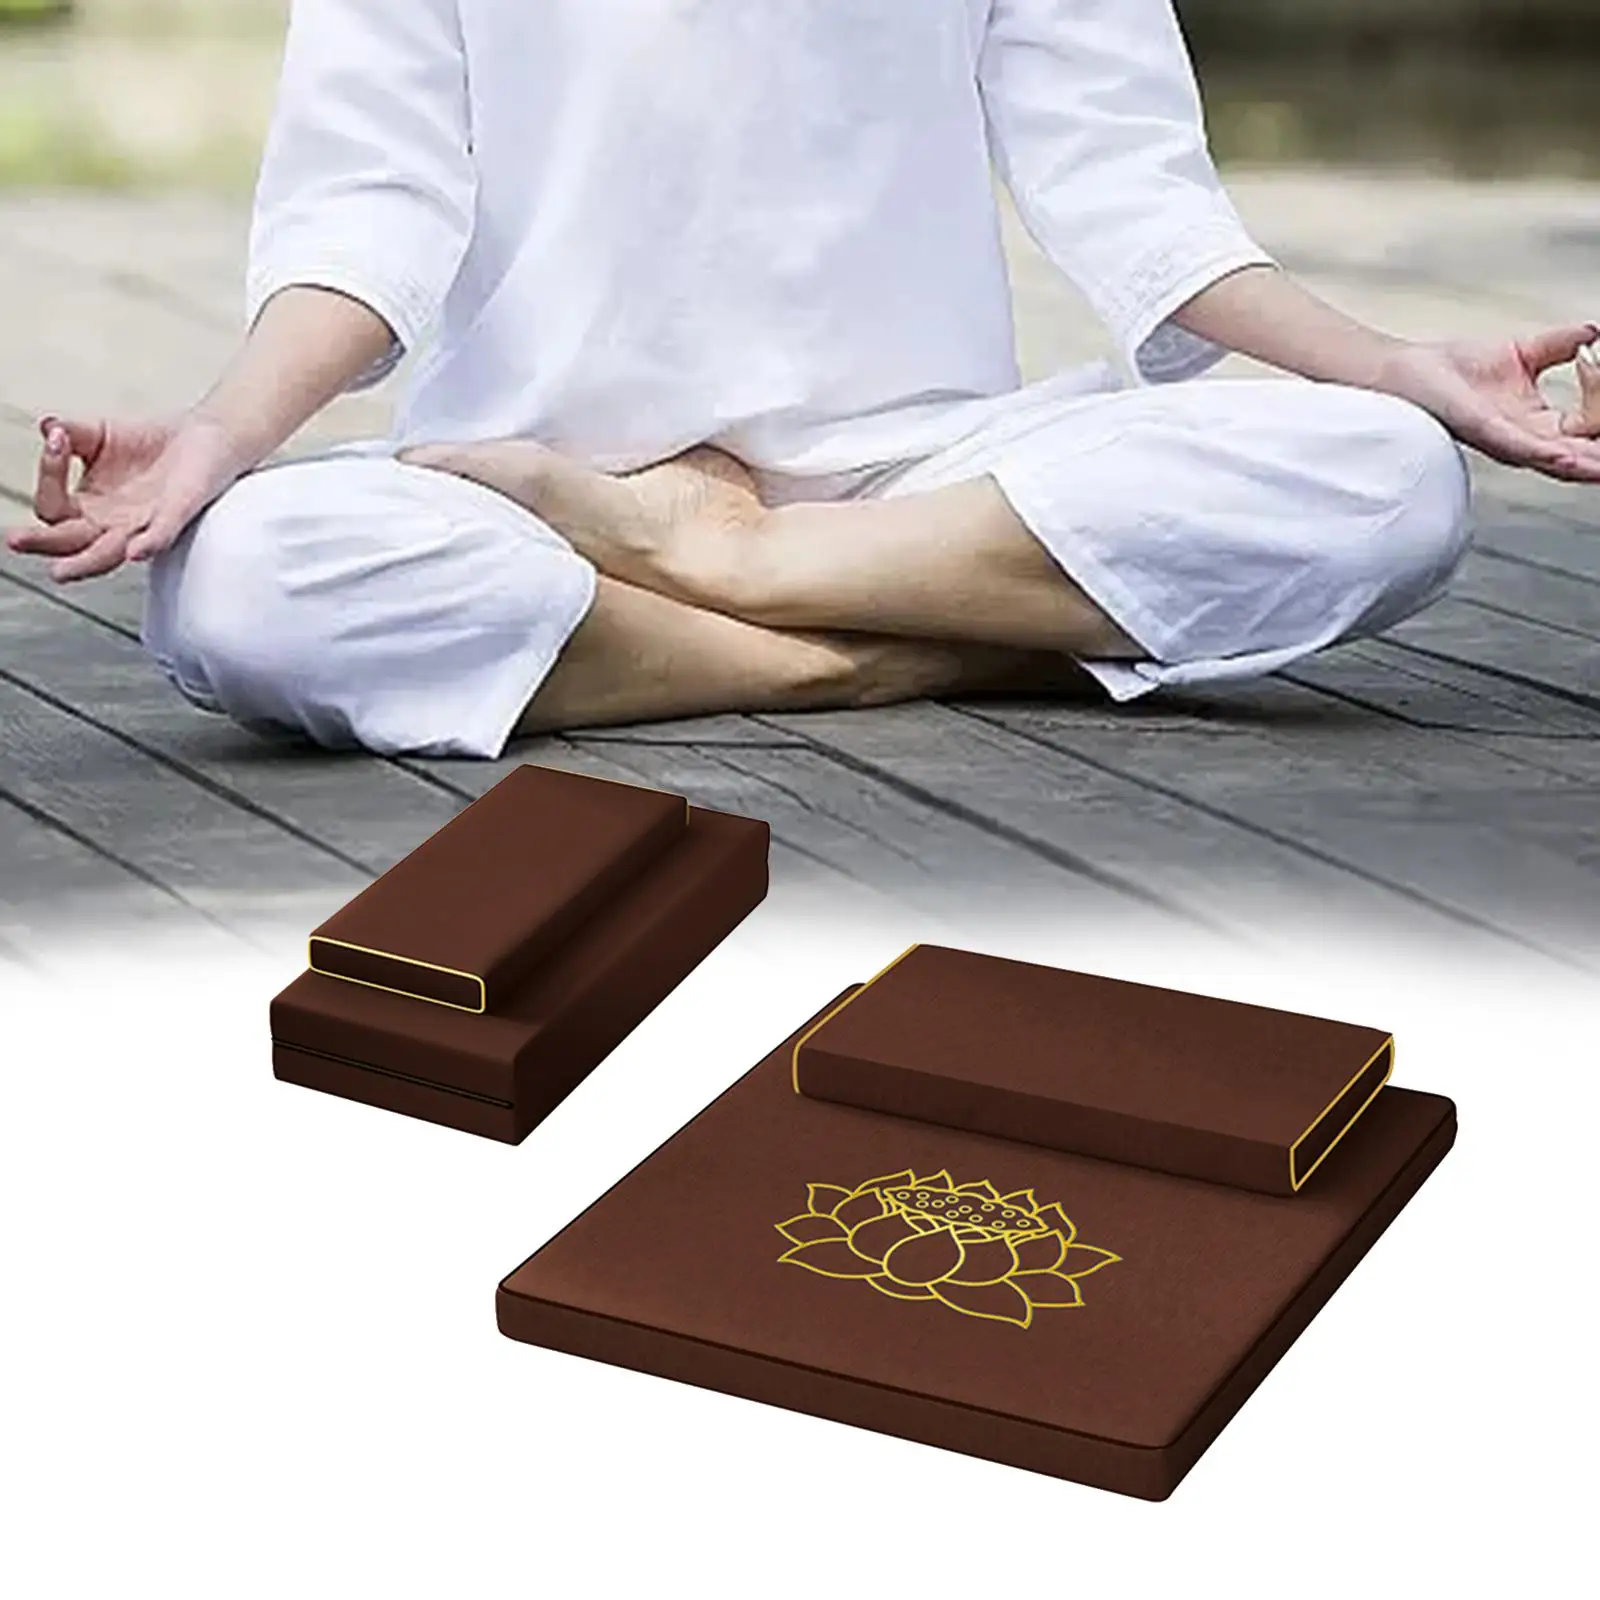 2 Pieces Portable Meditation Cushion Set Home Decor Comfort Large Square Pad for Footstool Dining Chair Living Room Balcony Yoga